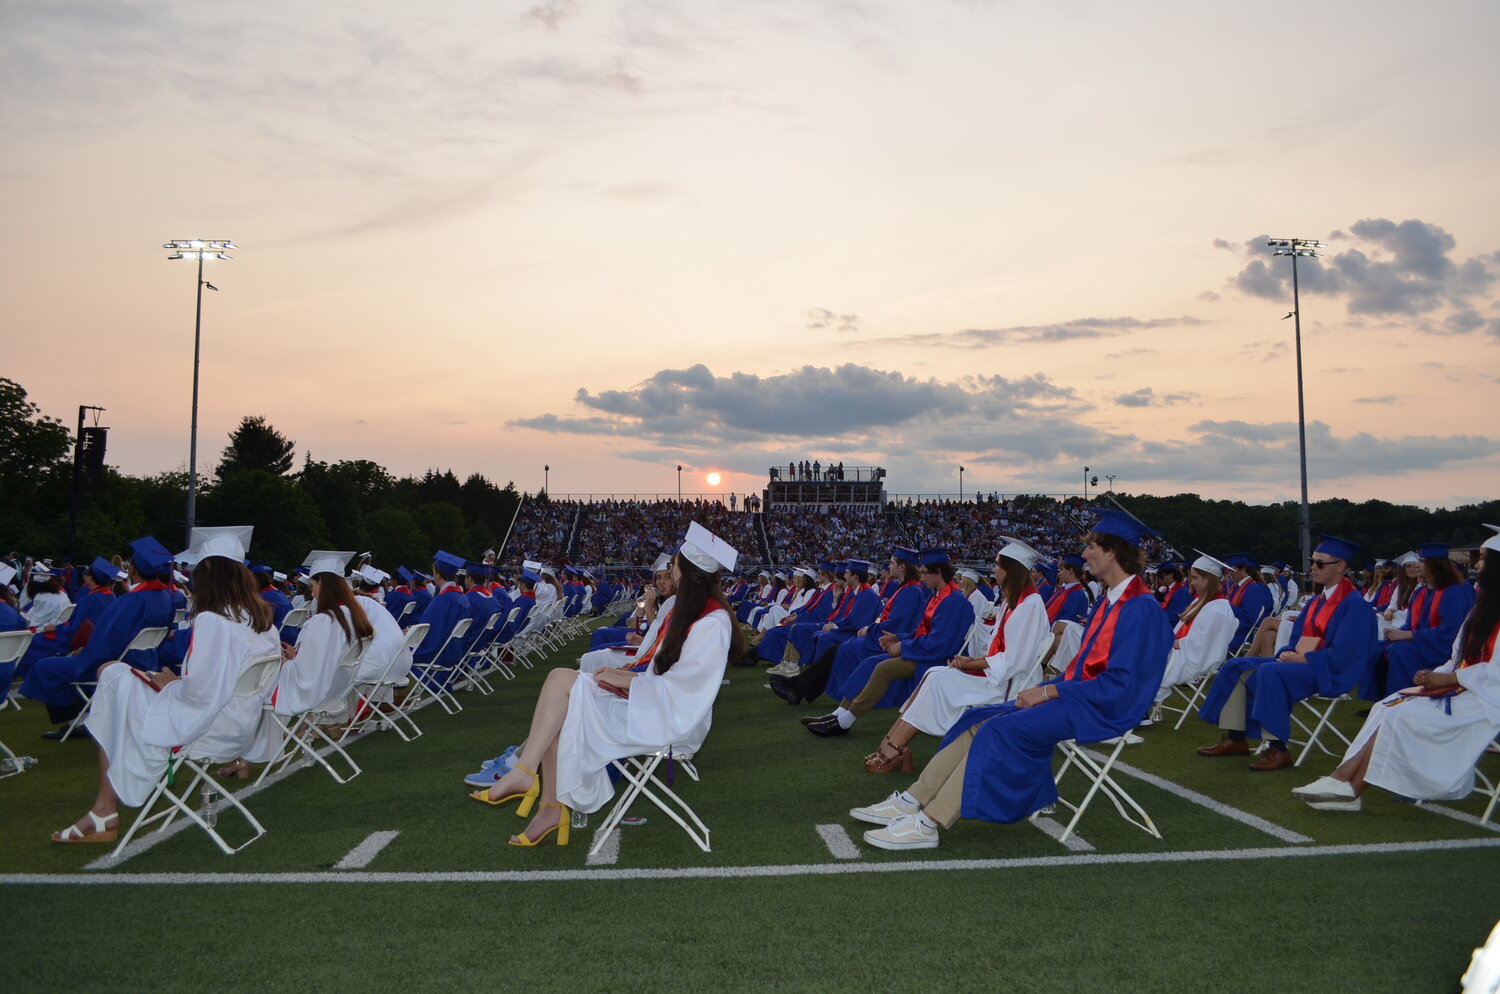 The Central Bucks High School East Class of 2023 holds the distinction of being the first class at East to graduate in the evening under the lights.